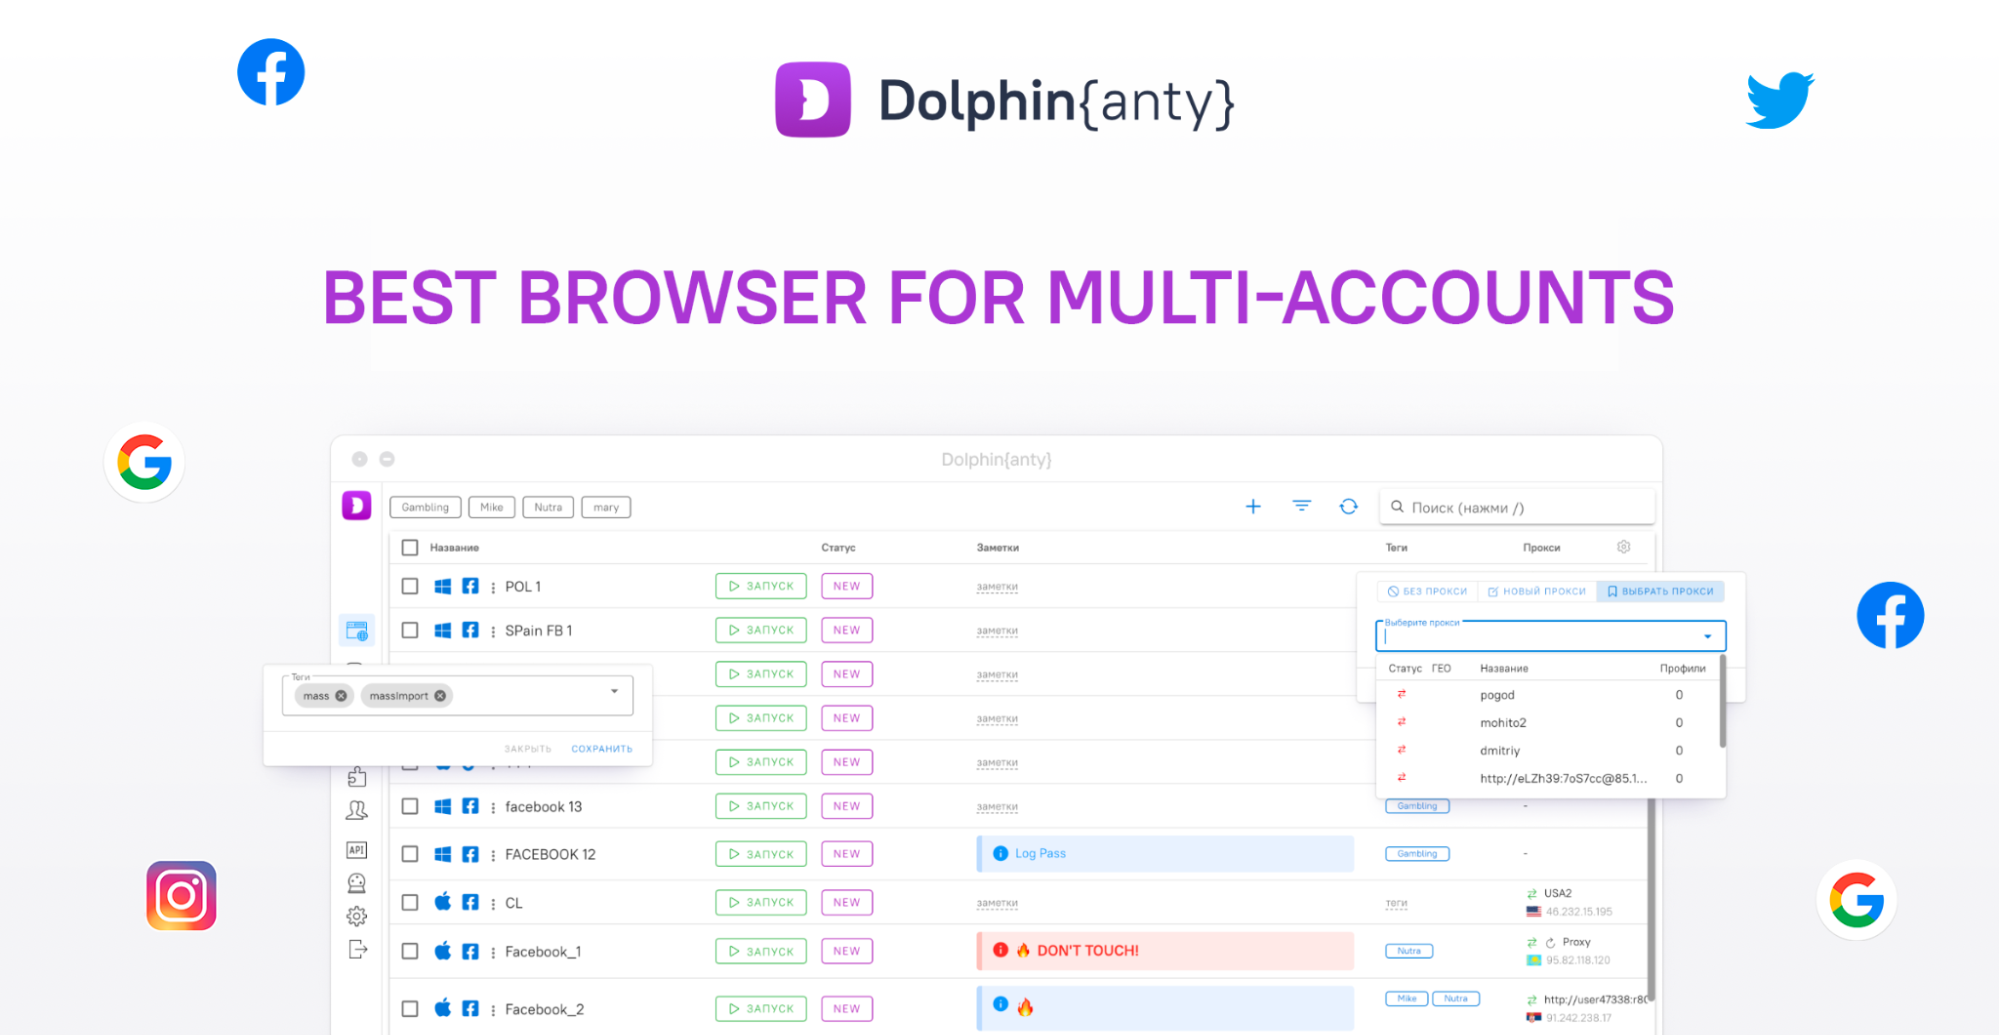 Dolphin Anty for multi-accounting